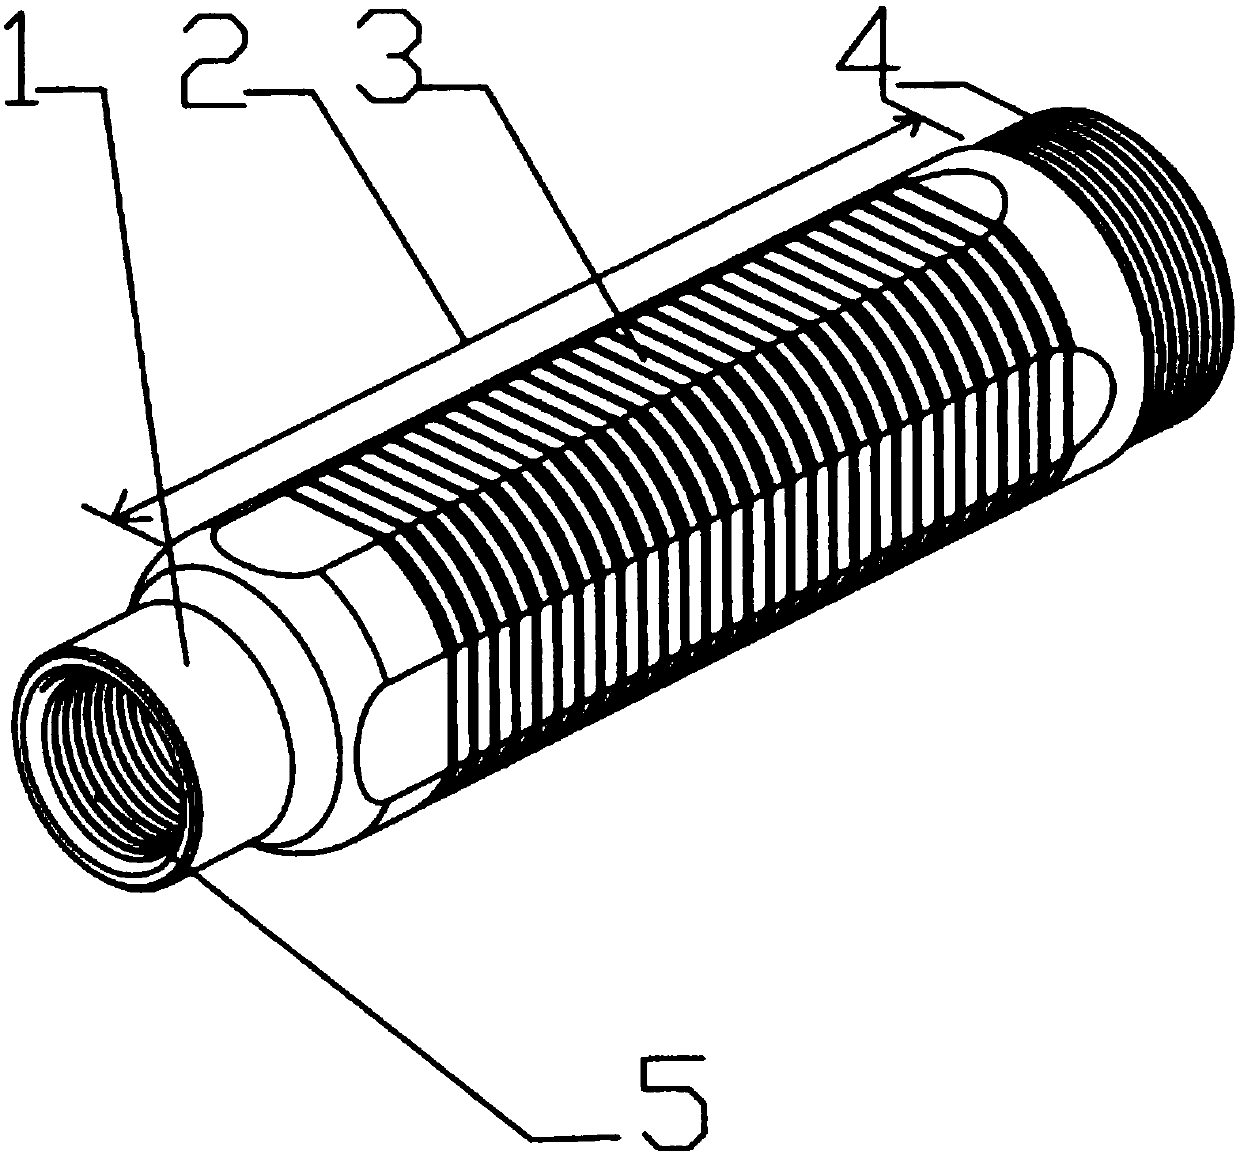 Connecting pipe for novel fire-fighting equipment